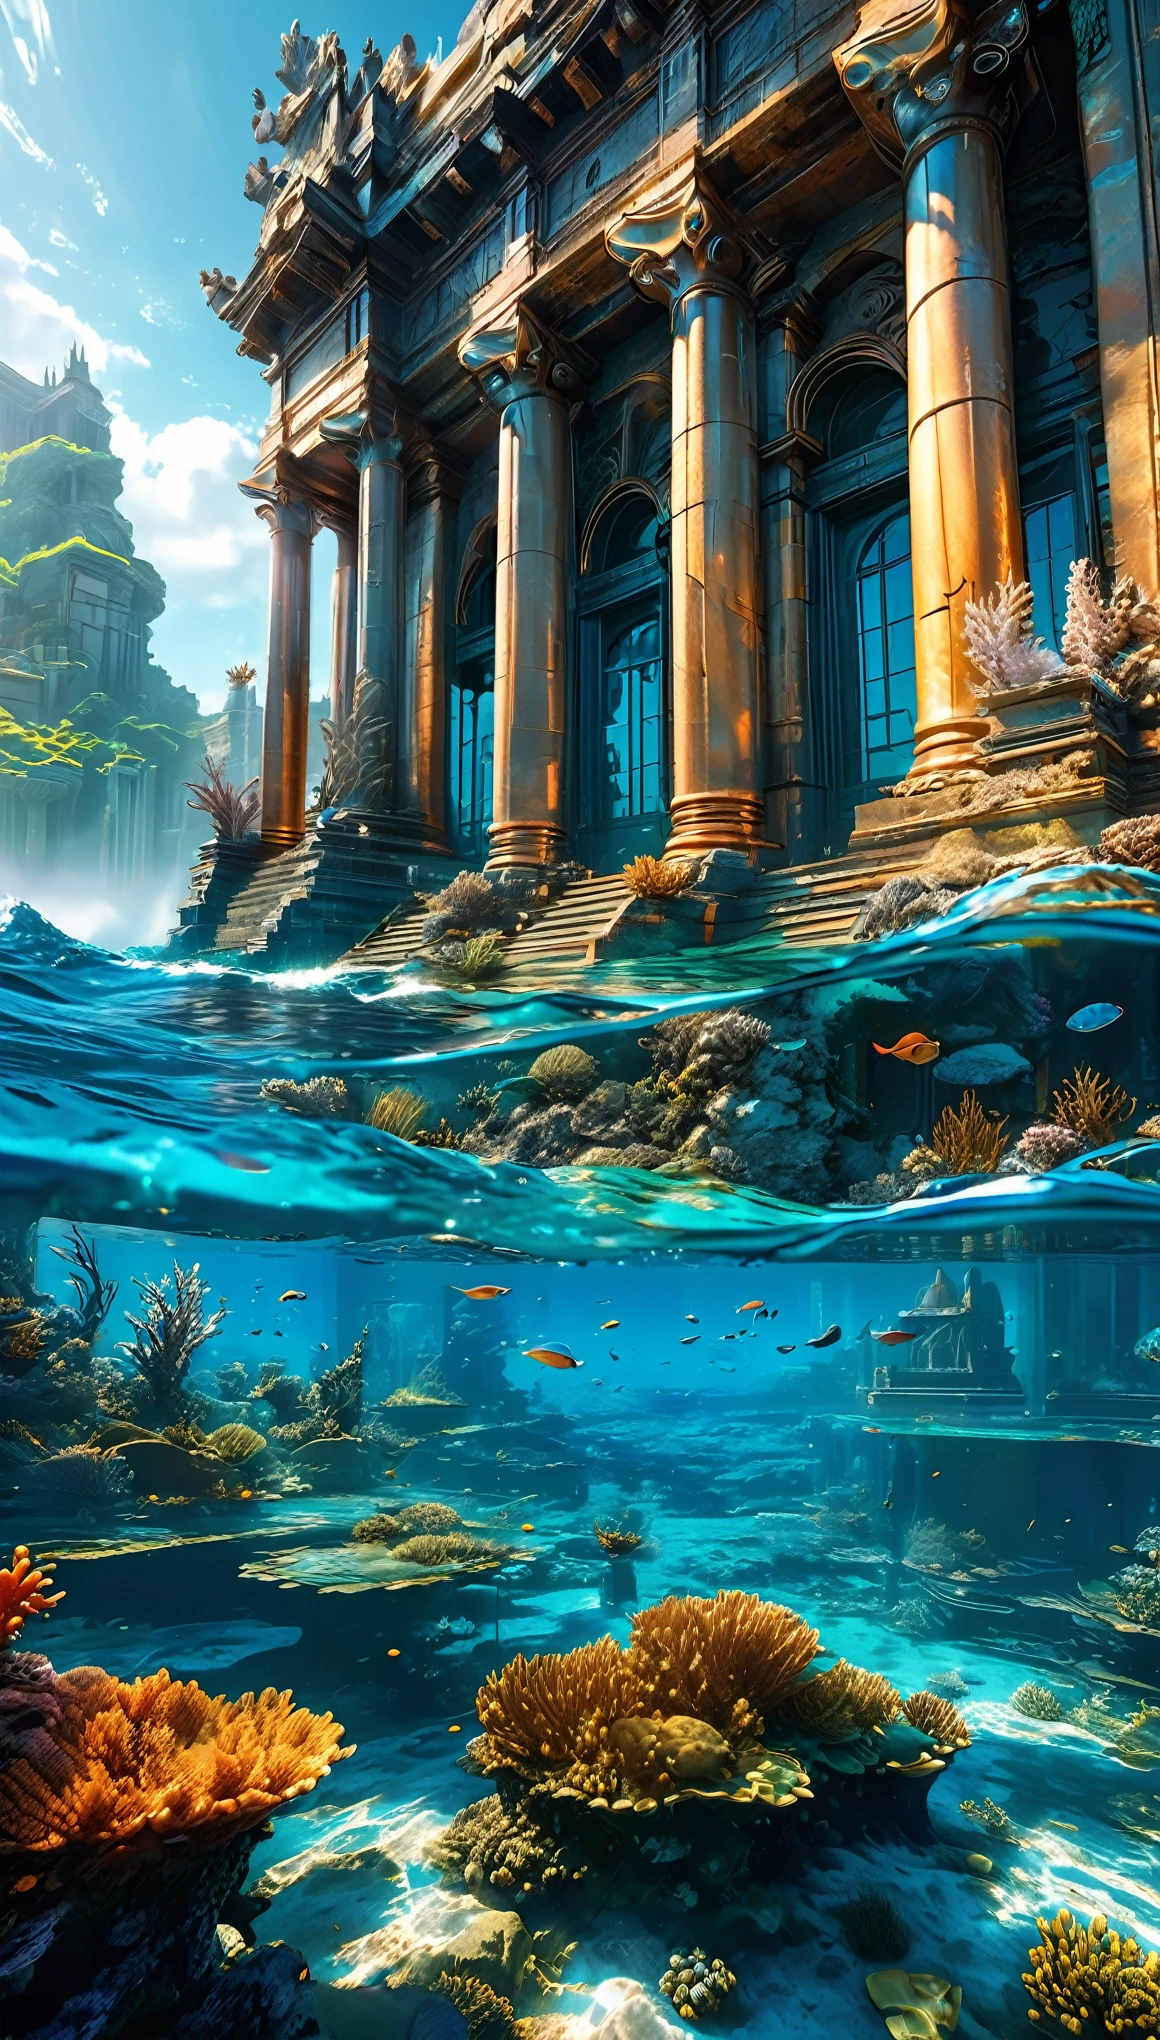 create an epic scene of the submerged city of Atlantis, rendered in highly detailed digital art with 4K and 8K resolutions, using Octane and inspired by the style of Aquaman. This concept art should be a masterpiece of official illustration, merging realism and mythical elements to achieve the highest quality.

The landscape is an underwater marvel, with the grand, ancient city of Atlantis sprawled across the ocean floor. Majestic structures, adorned with intricate carvings and bioluminescent corals, rise from the depths, their spires reaching towards the surface. The city is bathed in a surreal, bluish light that filters through the water.

Schools of vibrant fish and graceful sea creatures swim through the city, adding life and movement to the scene. Bioluminescent plants and corals cast an ethereal glow, illuminating the intricate architecture and creating a dreamlike atmosphere.

In the distance, towering cliffs and underwater mountains loom, their shadows adding depth and mystery to the landscape. The water is crystal clear, revealing the detailed textures of the ancient buildings and the diverse marine life.

The composition captures the grandeur of the Atlantean architecture and the delicate details of the marine flora and fauna. The rendering by Octane highlights the textures of the corals, stone structures, and sea creatures, bringing the submerged city to life with stunning realism and fantasy.

Every element, from the majestic buildings to the vibrant marine life, is meticulously crafted to create a vivid and immersive experience. This digital artwork embodies the mythical imagination and perfect composition envisioned by artists like H. R. Giger and Alex Ross, making it a true masterpiece